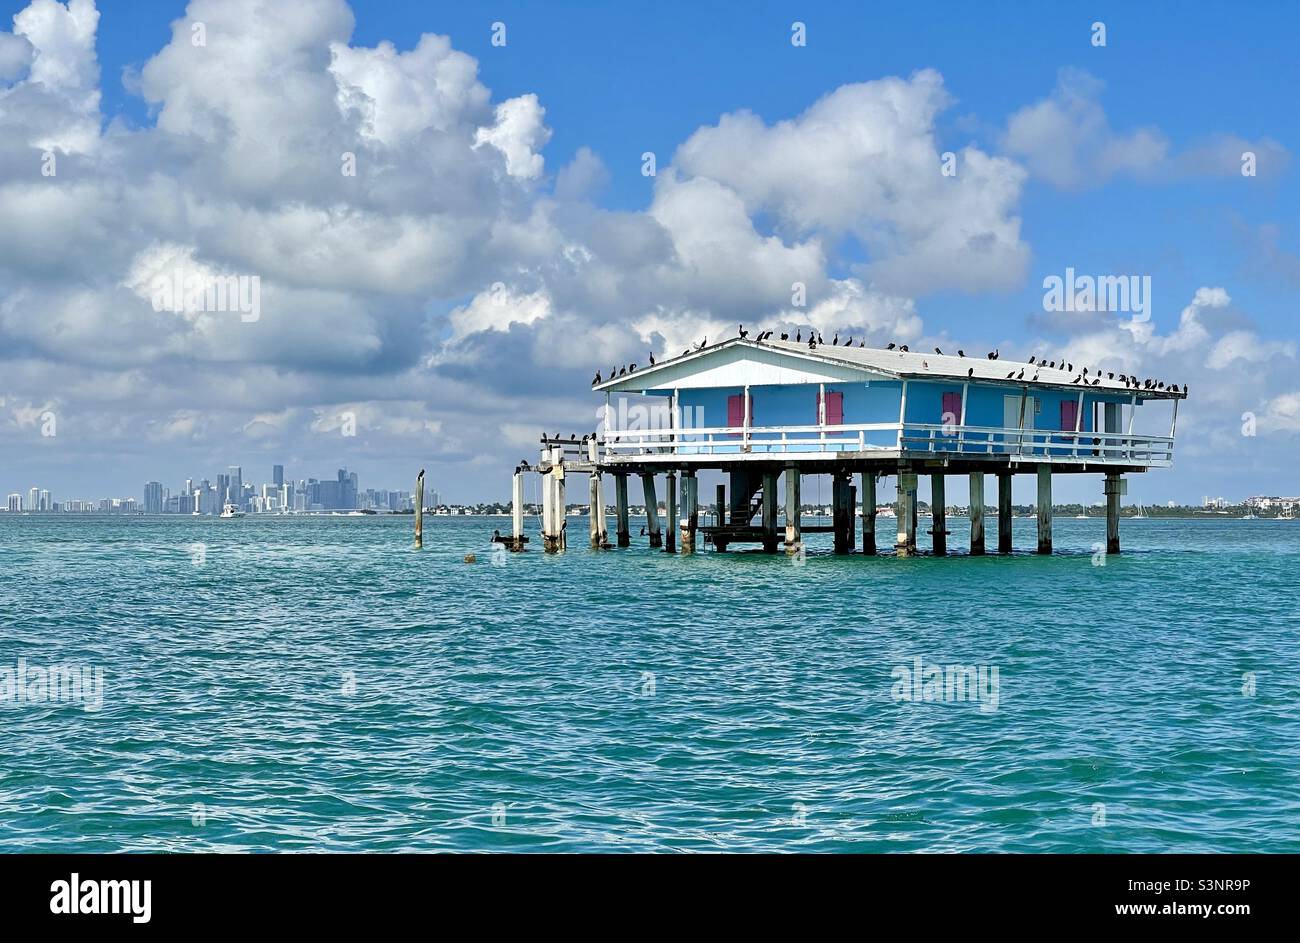 House in Stiltsville in Biscayne Bay, Miami, Florida with the Miami skyline in the background. Stock Photo